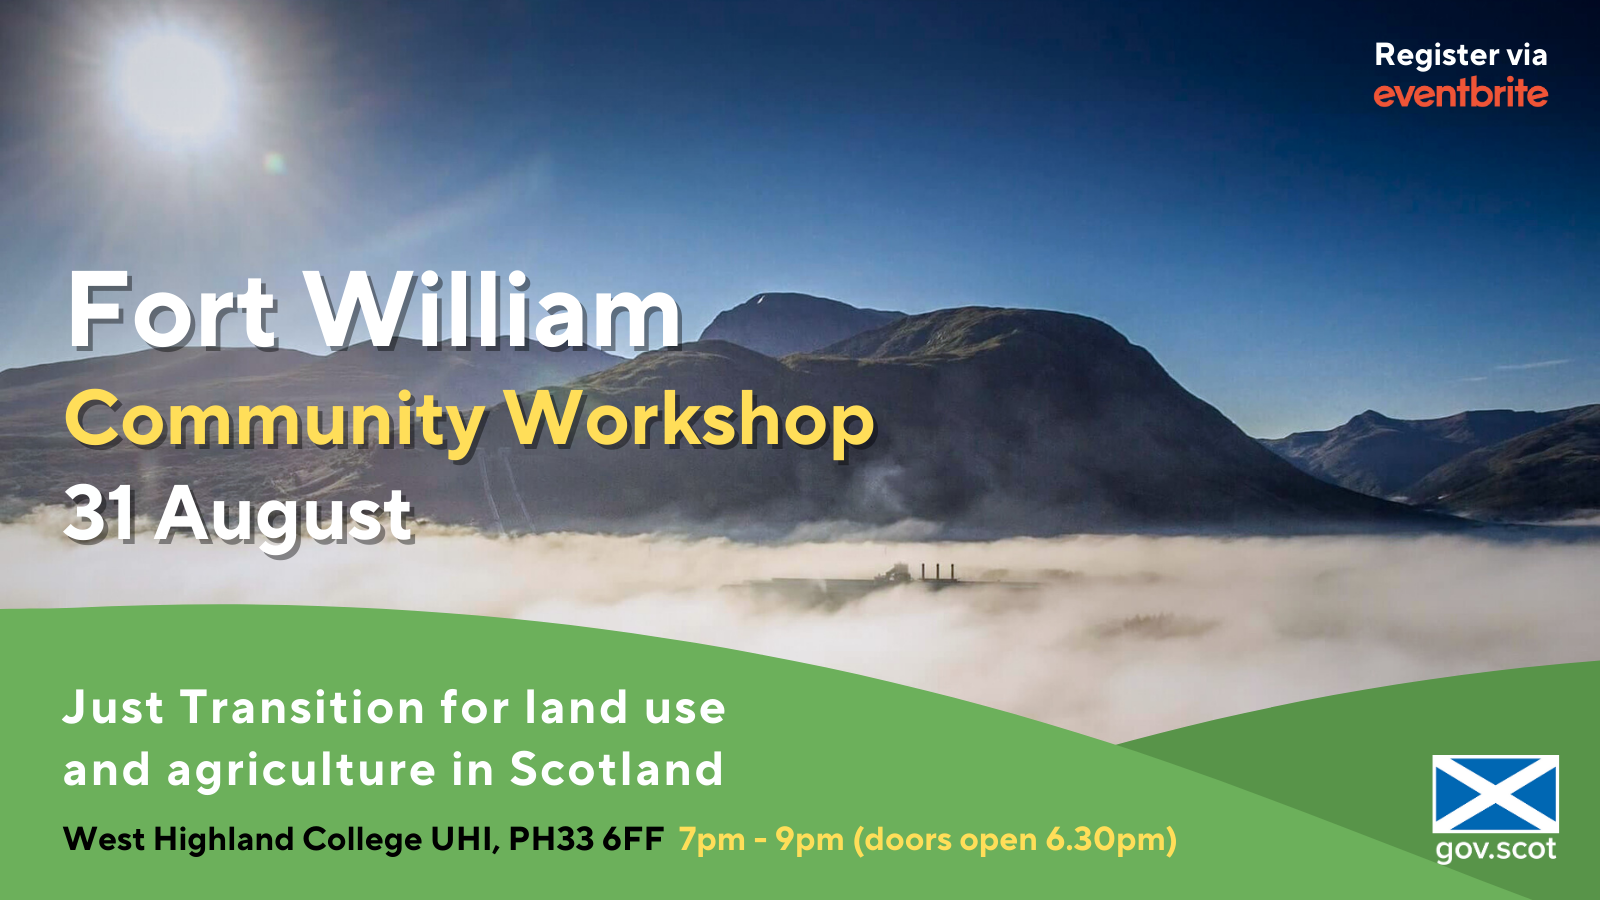 Land Use and Agriculture Just Transition Community Workshop - Fort William Flyer